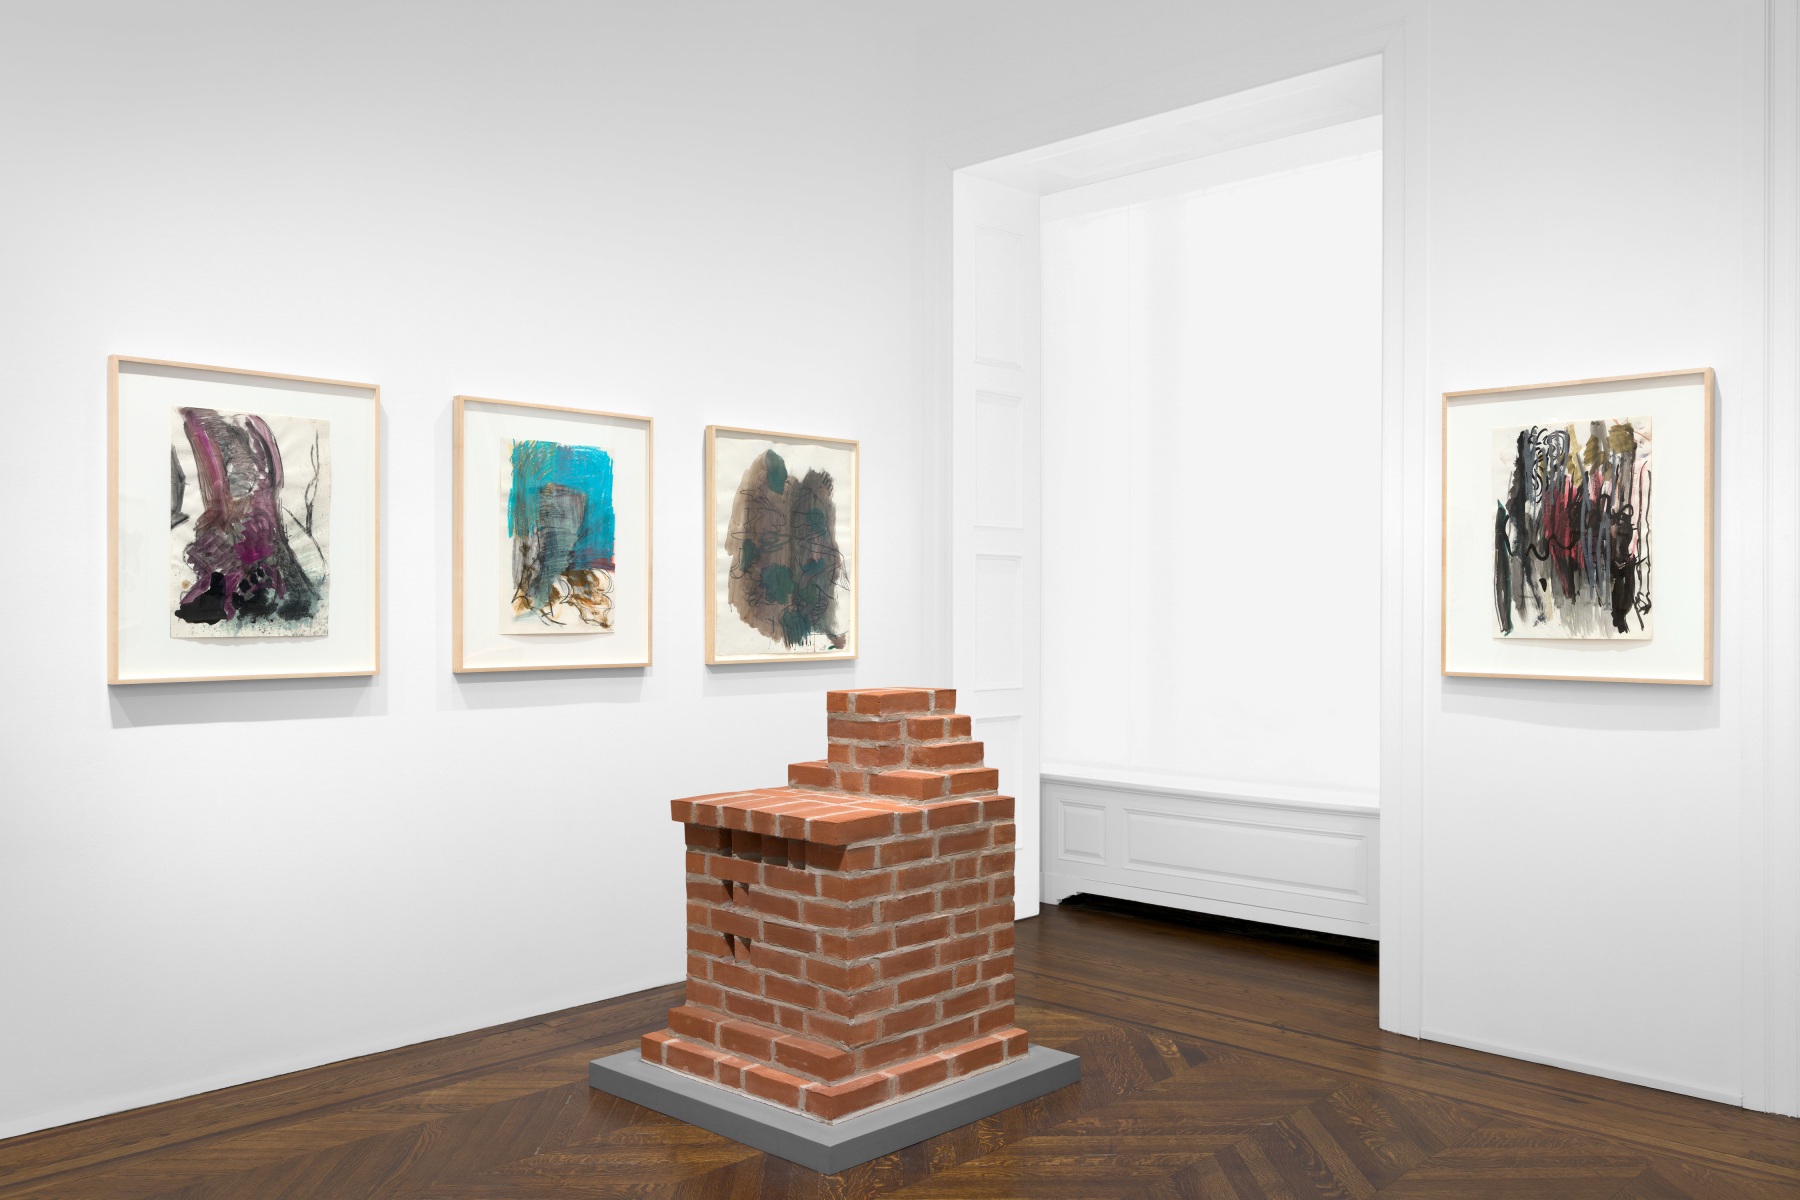 PER KIRKEBY Works on Paper, Works in Brick 20 November 2019 through 25 January 2020 UPPER EAST SIDE, NEW YORK, Installation View 15